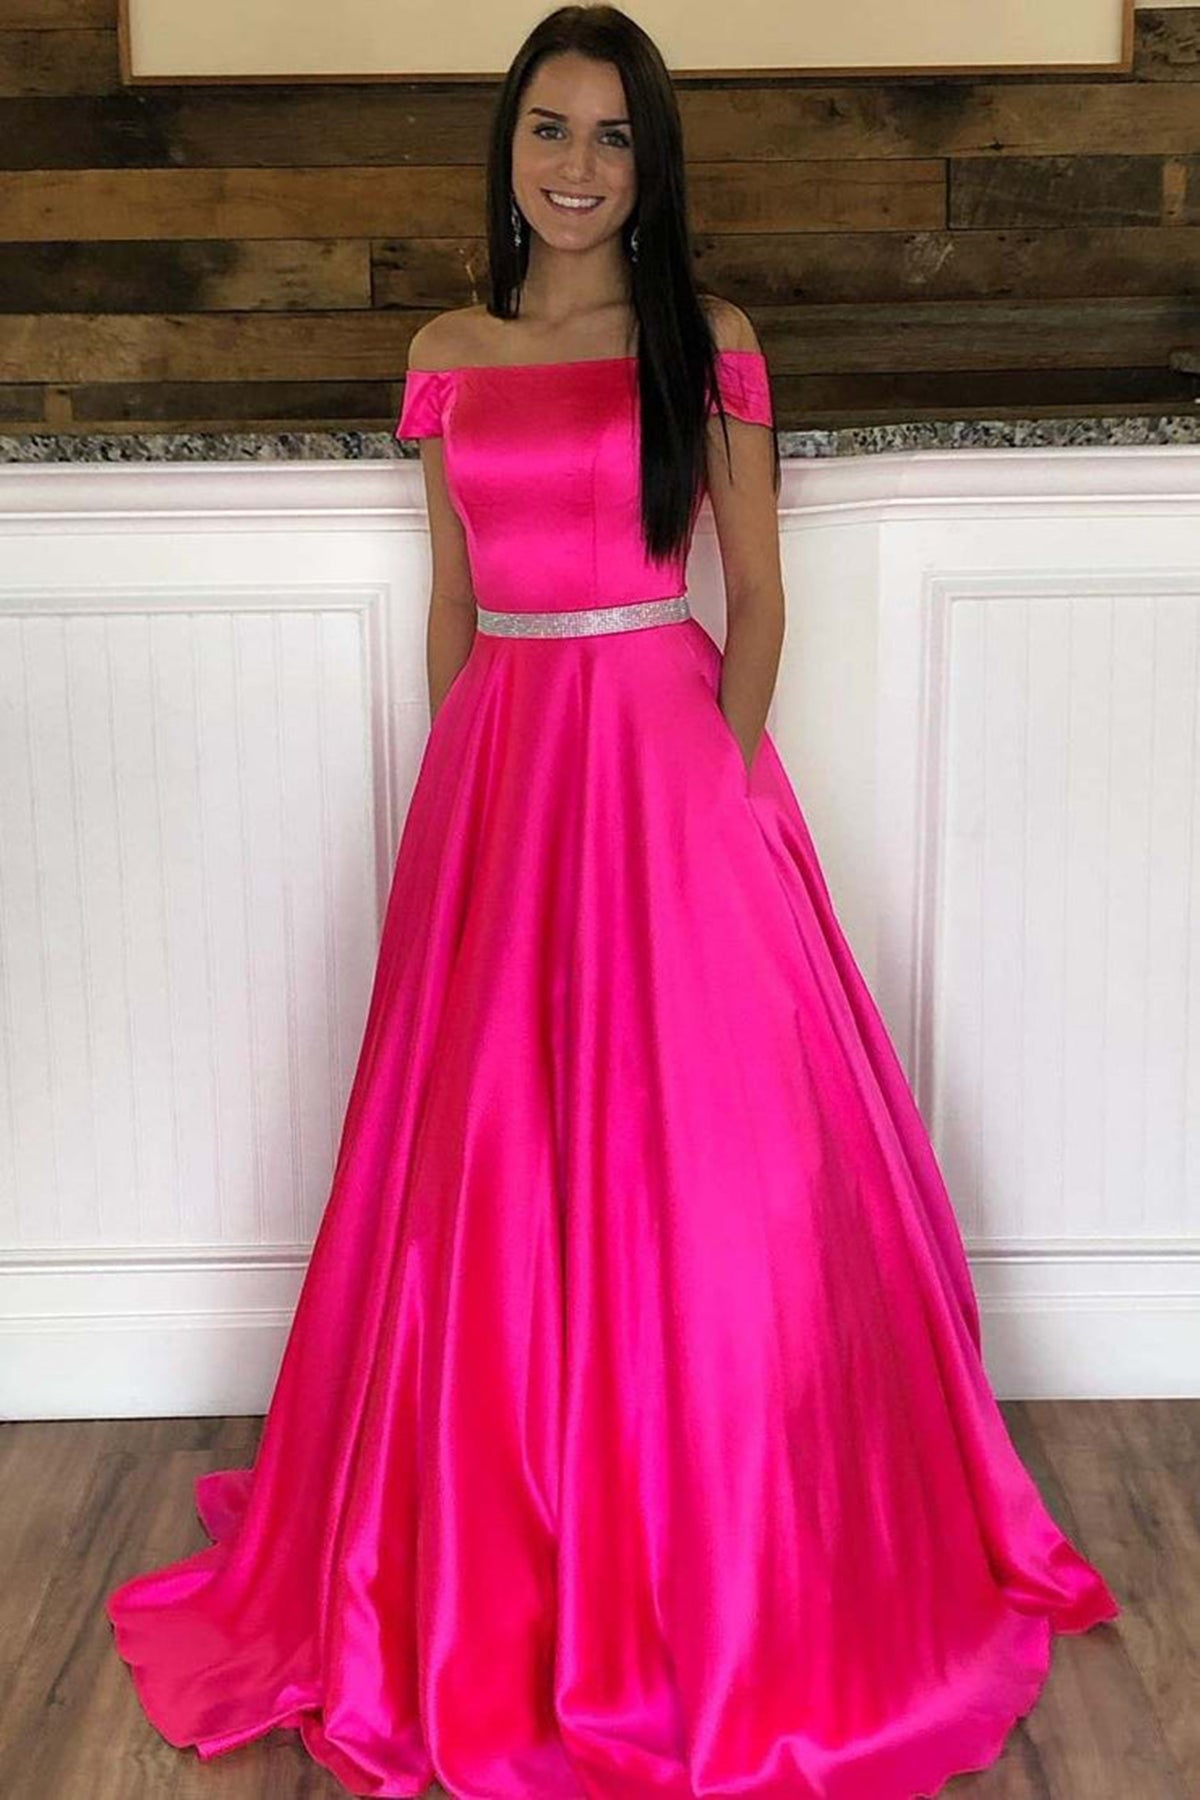 Beaded Off-the-shoulder Baby Pink Prom Ball Gown - Xdressy